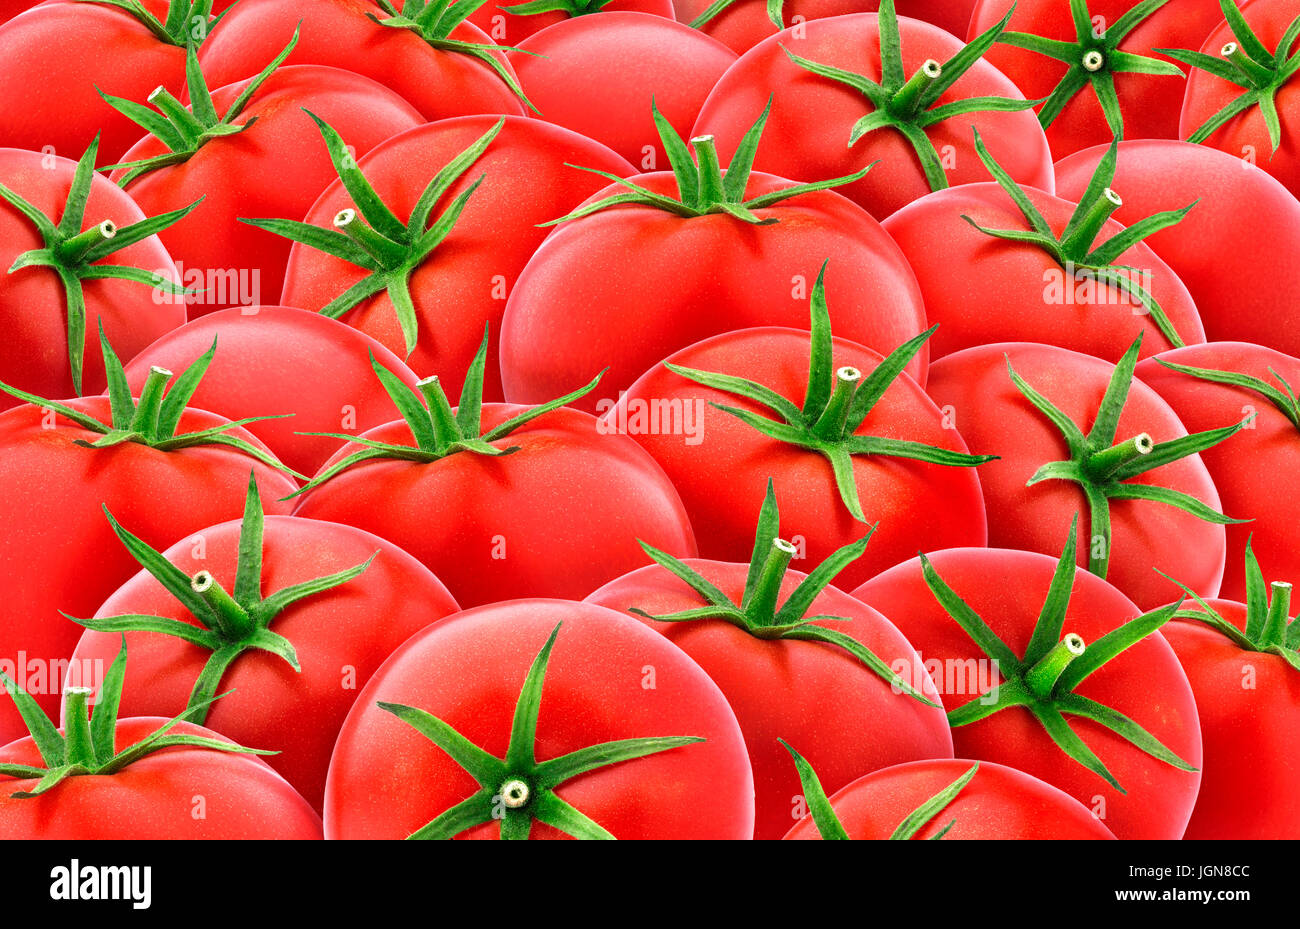 Tomatoes background. Red tomato texture. Stock Photo